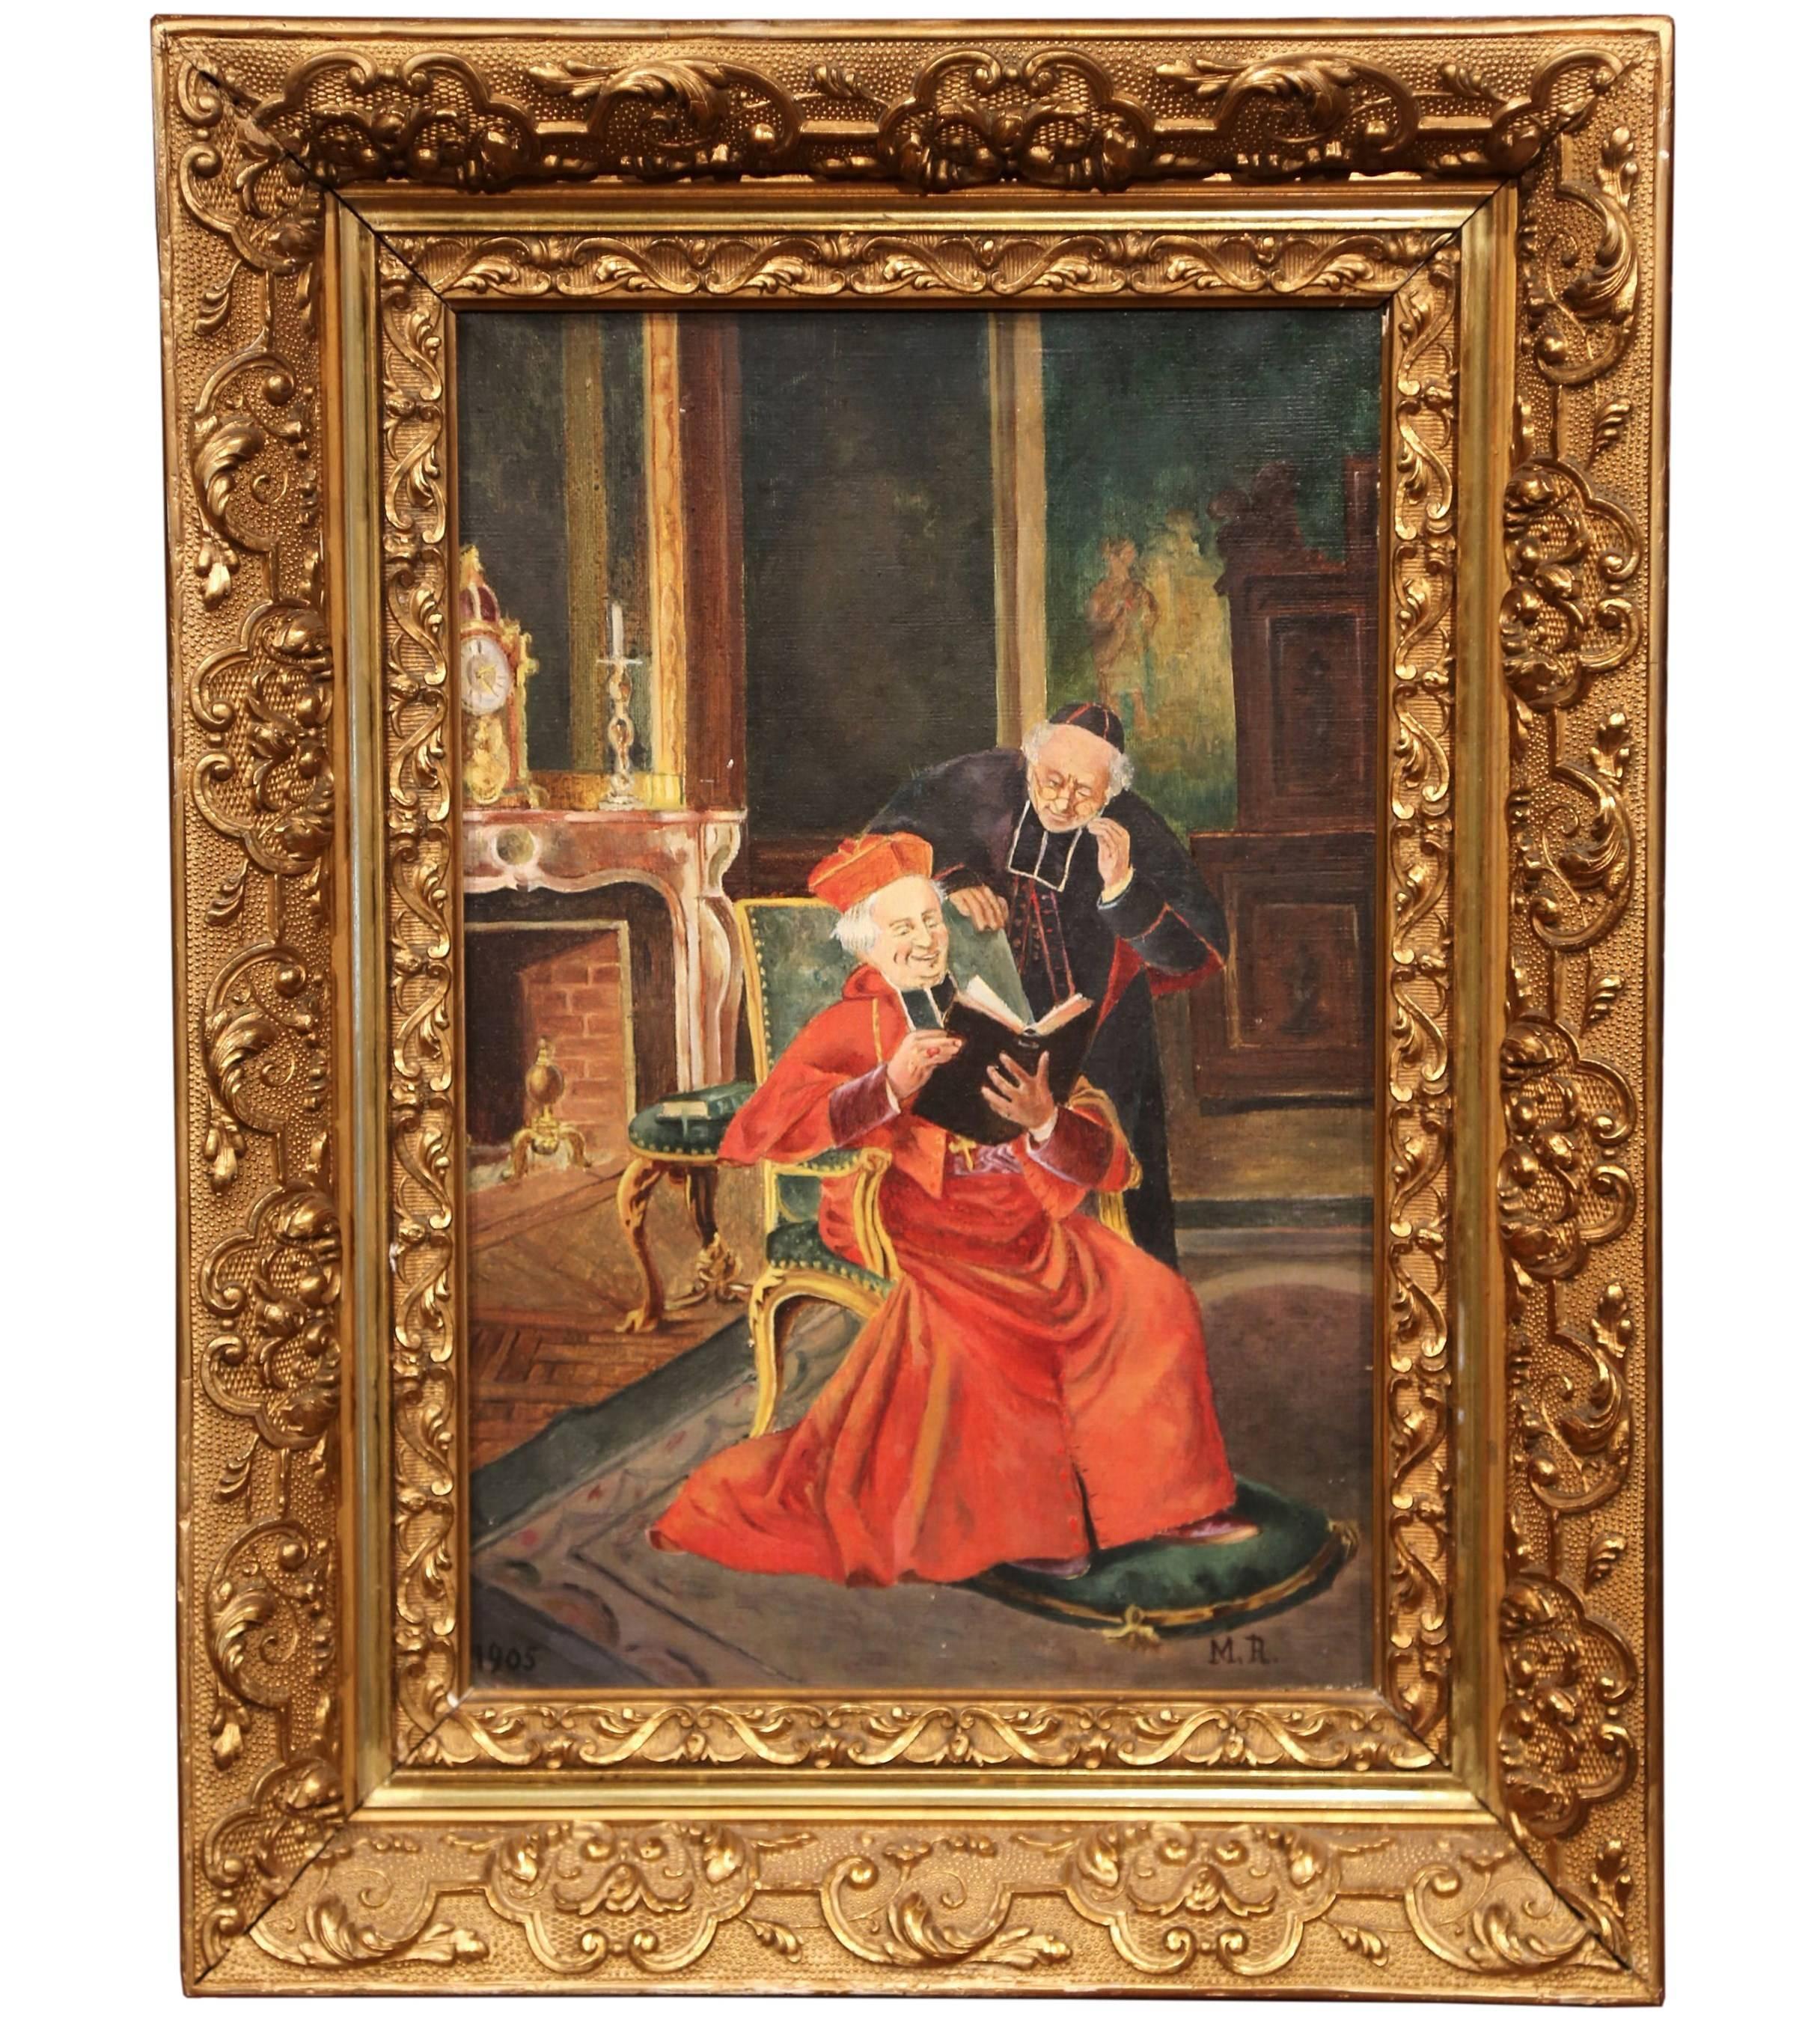 Unknown Figurative Painting - Early 20th Century French Painting with Priest and Cardinal Signed M. R. 1905